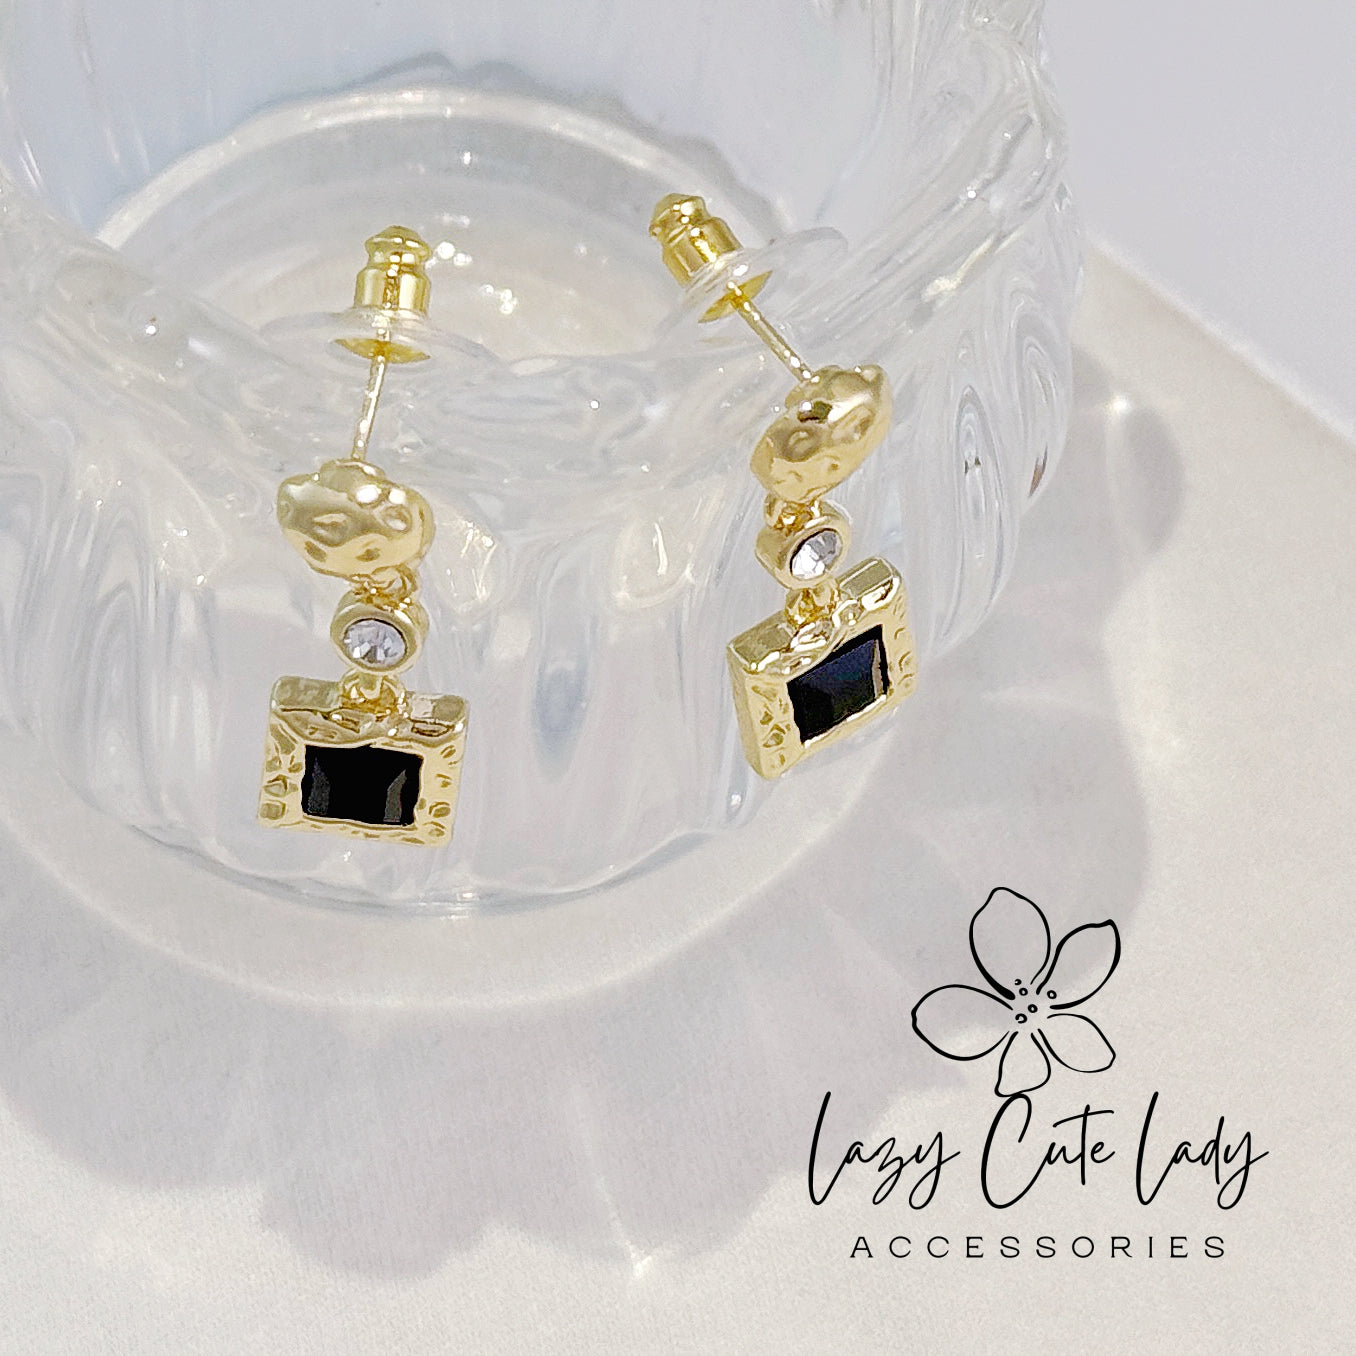 Lazy Cute Lady Accessories-Exquisite Metal Cube and Cubic Zirconia Drop Earring-Drop Earring-Metal allergy-friendly earring-Fashion Earring-Gift-for girl for women